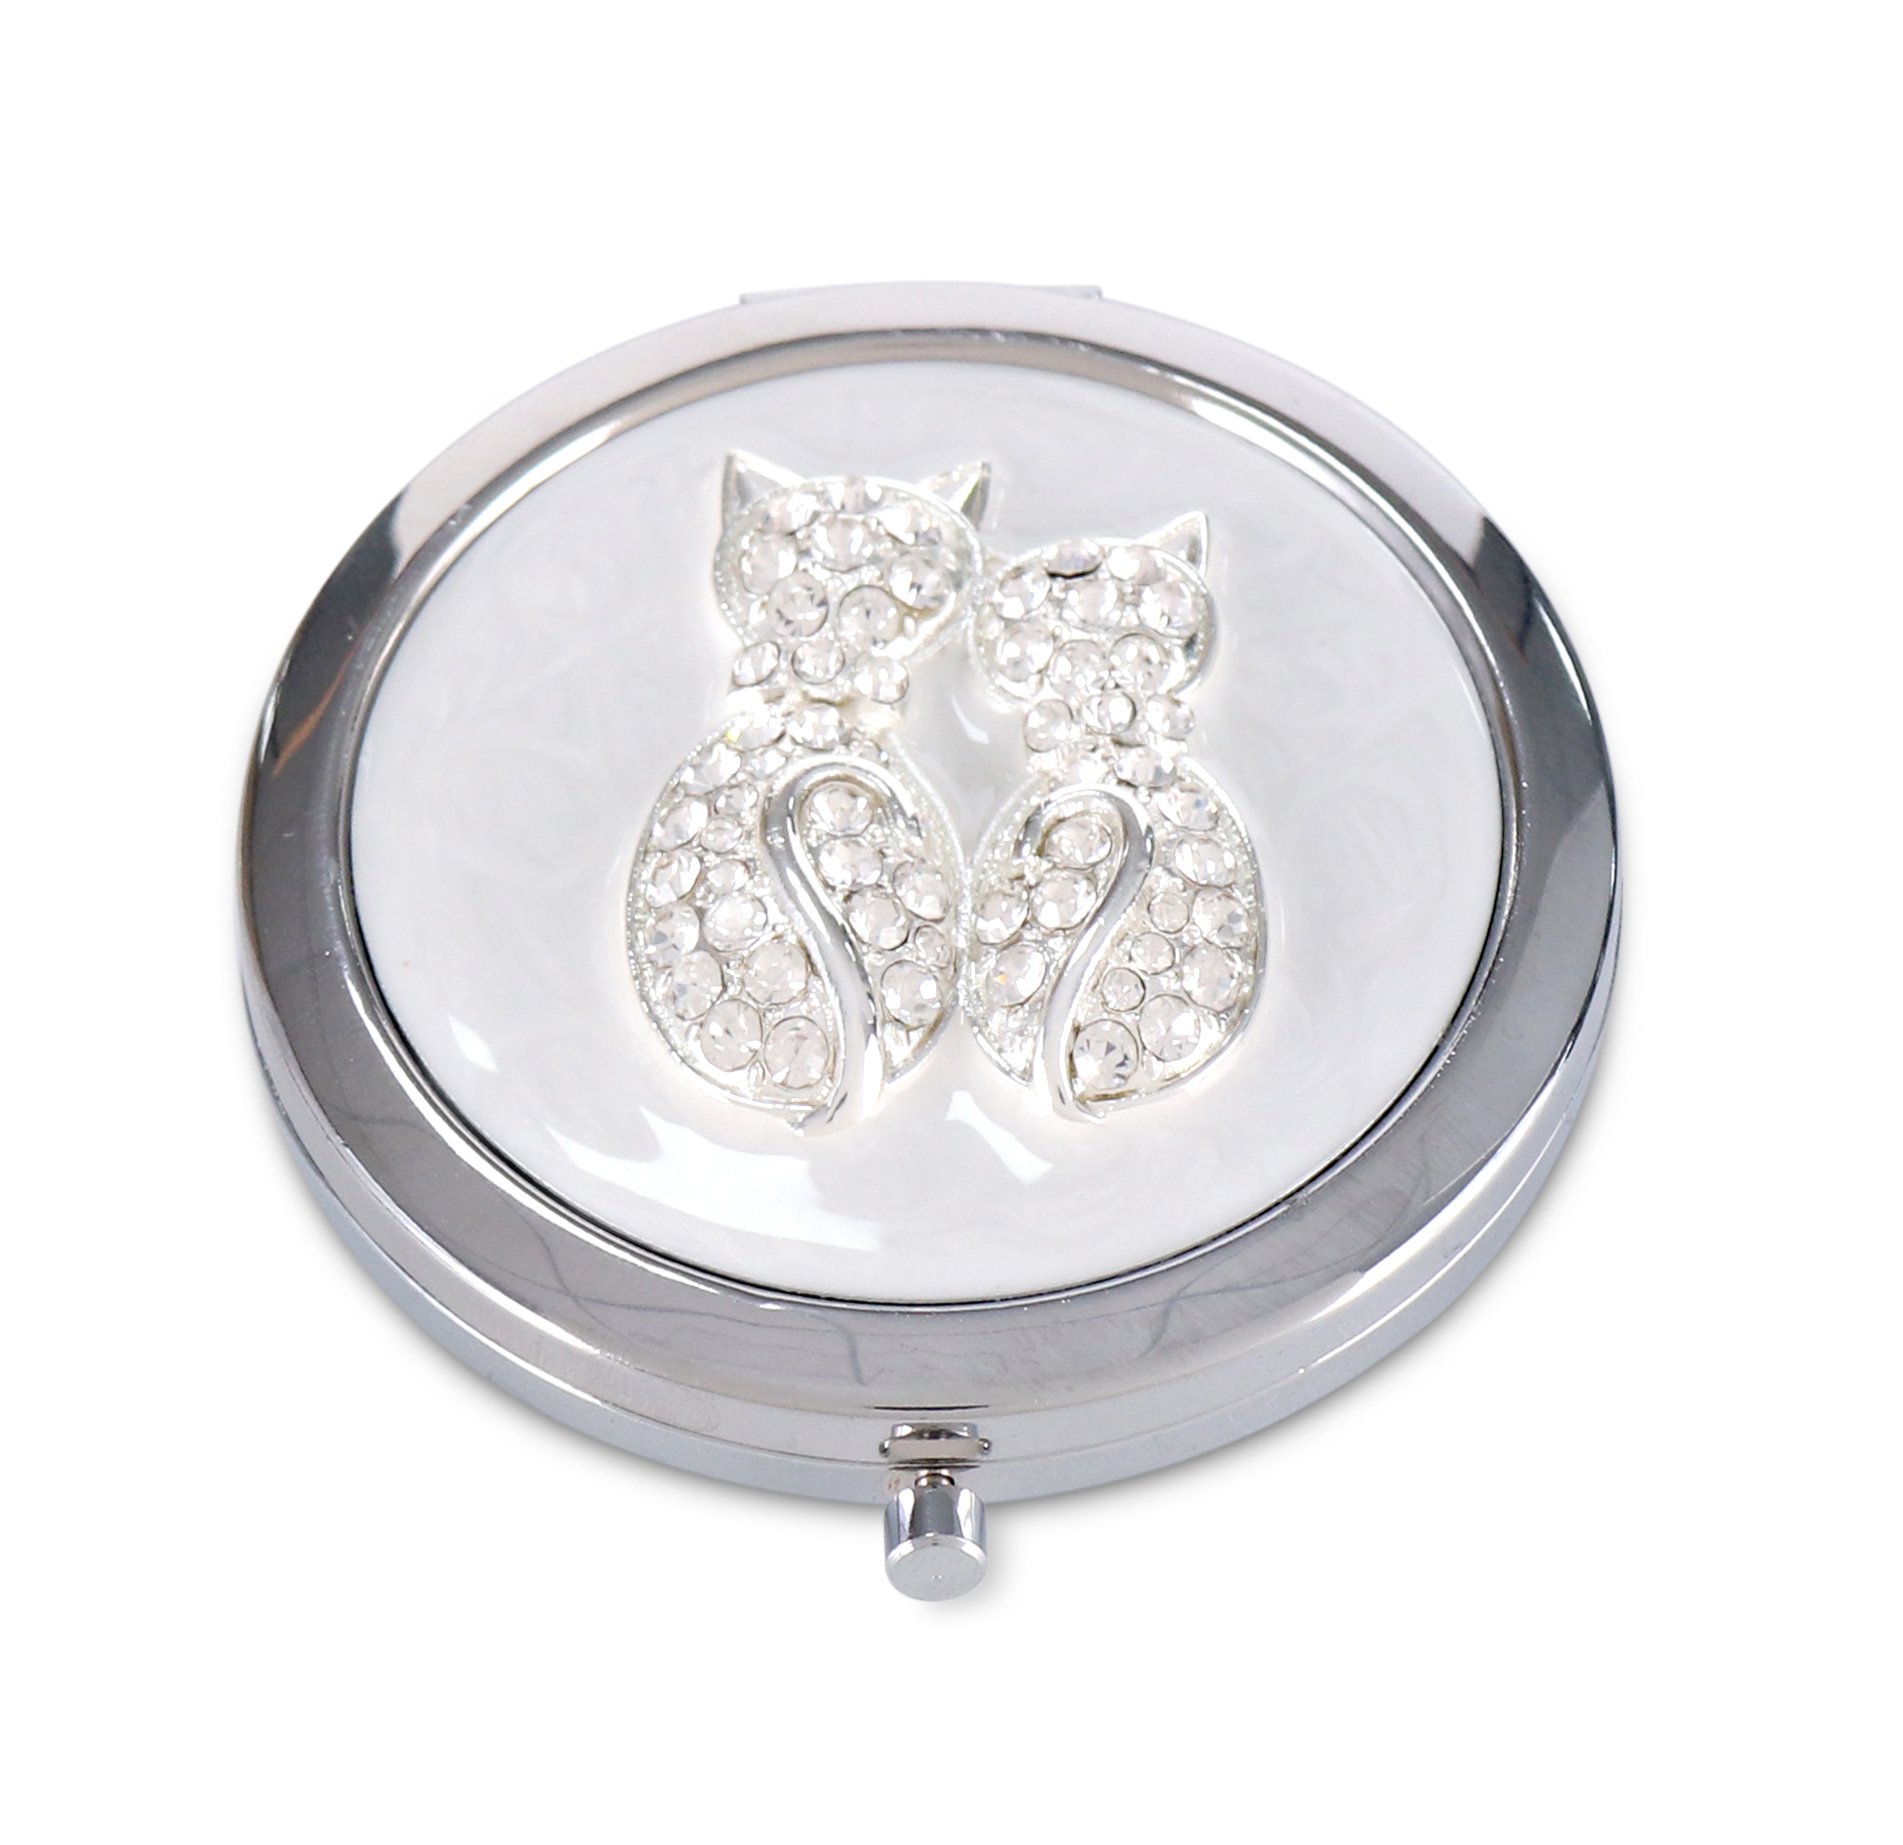 Two cats cosmetic mirror